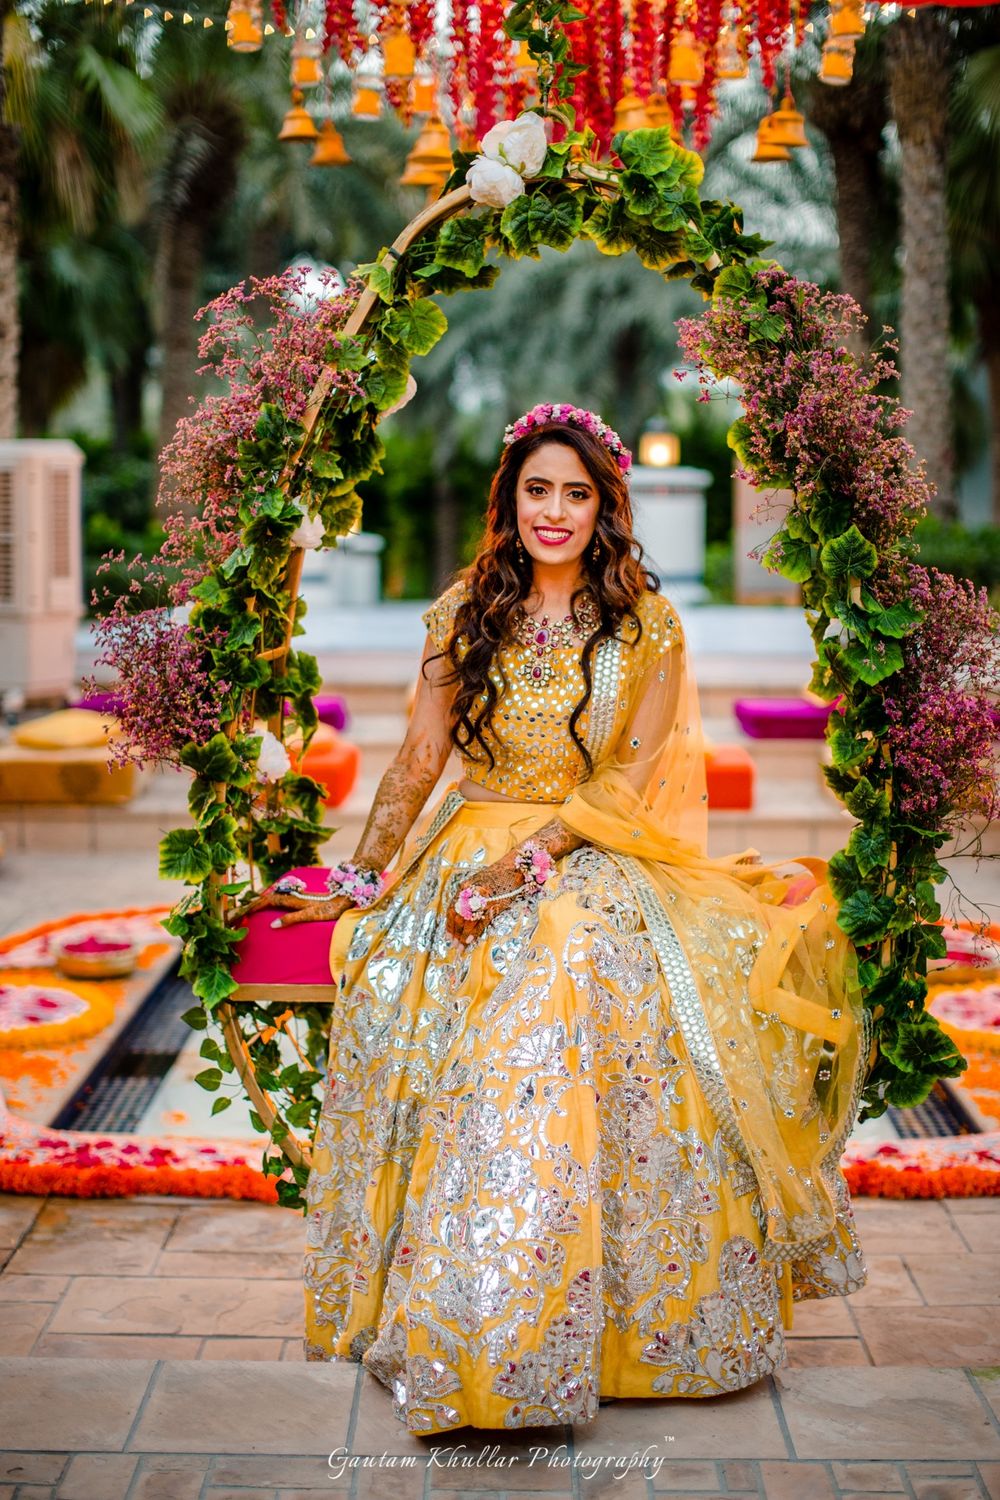 Photo of Stunning silver and yellow bridal lehenga with floral wreath for mehendi